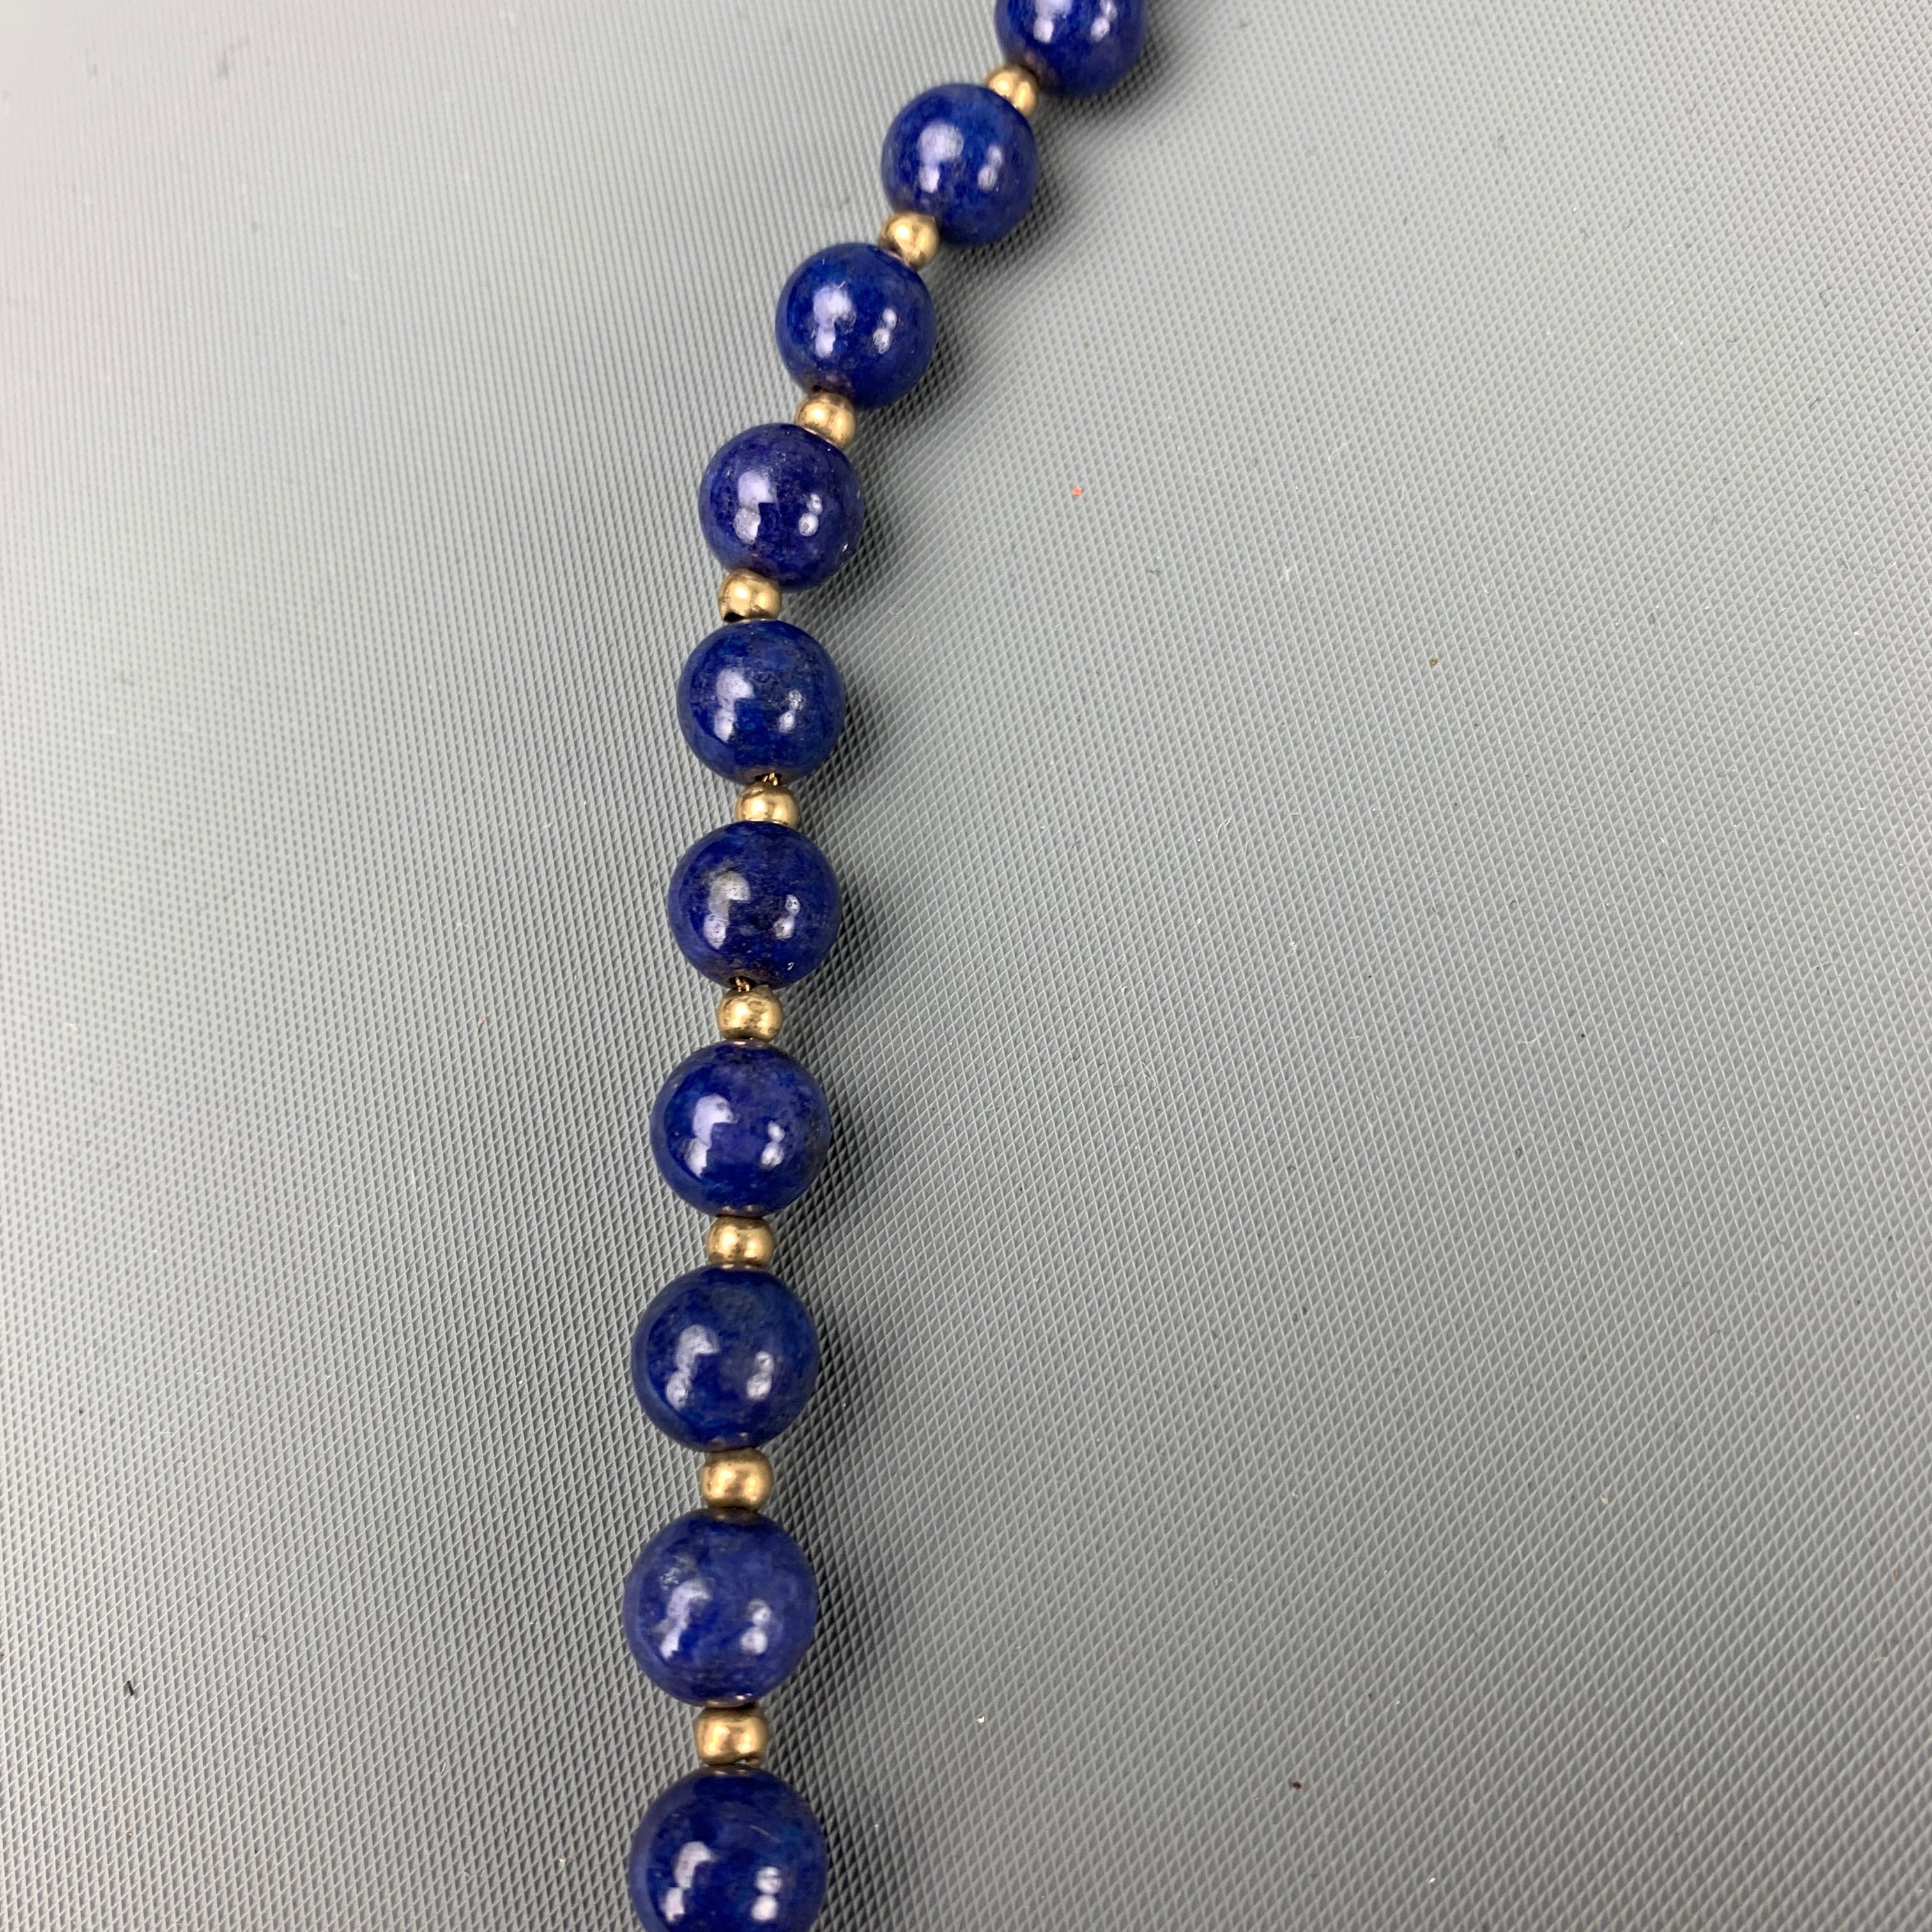 VINTAGE necklace comes in a blue lapis lazuli beaded design featuring a 14 K chain and a clasp closure. 

Very Good Pre-Owned Condition.

Measurements:

Length: 24 in. 